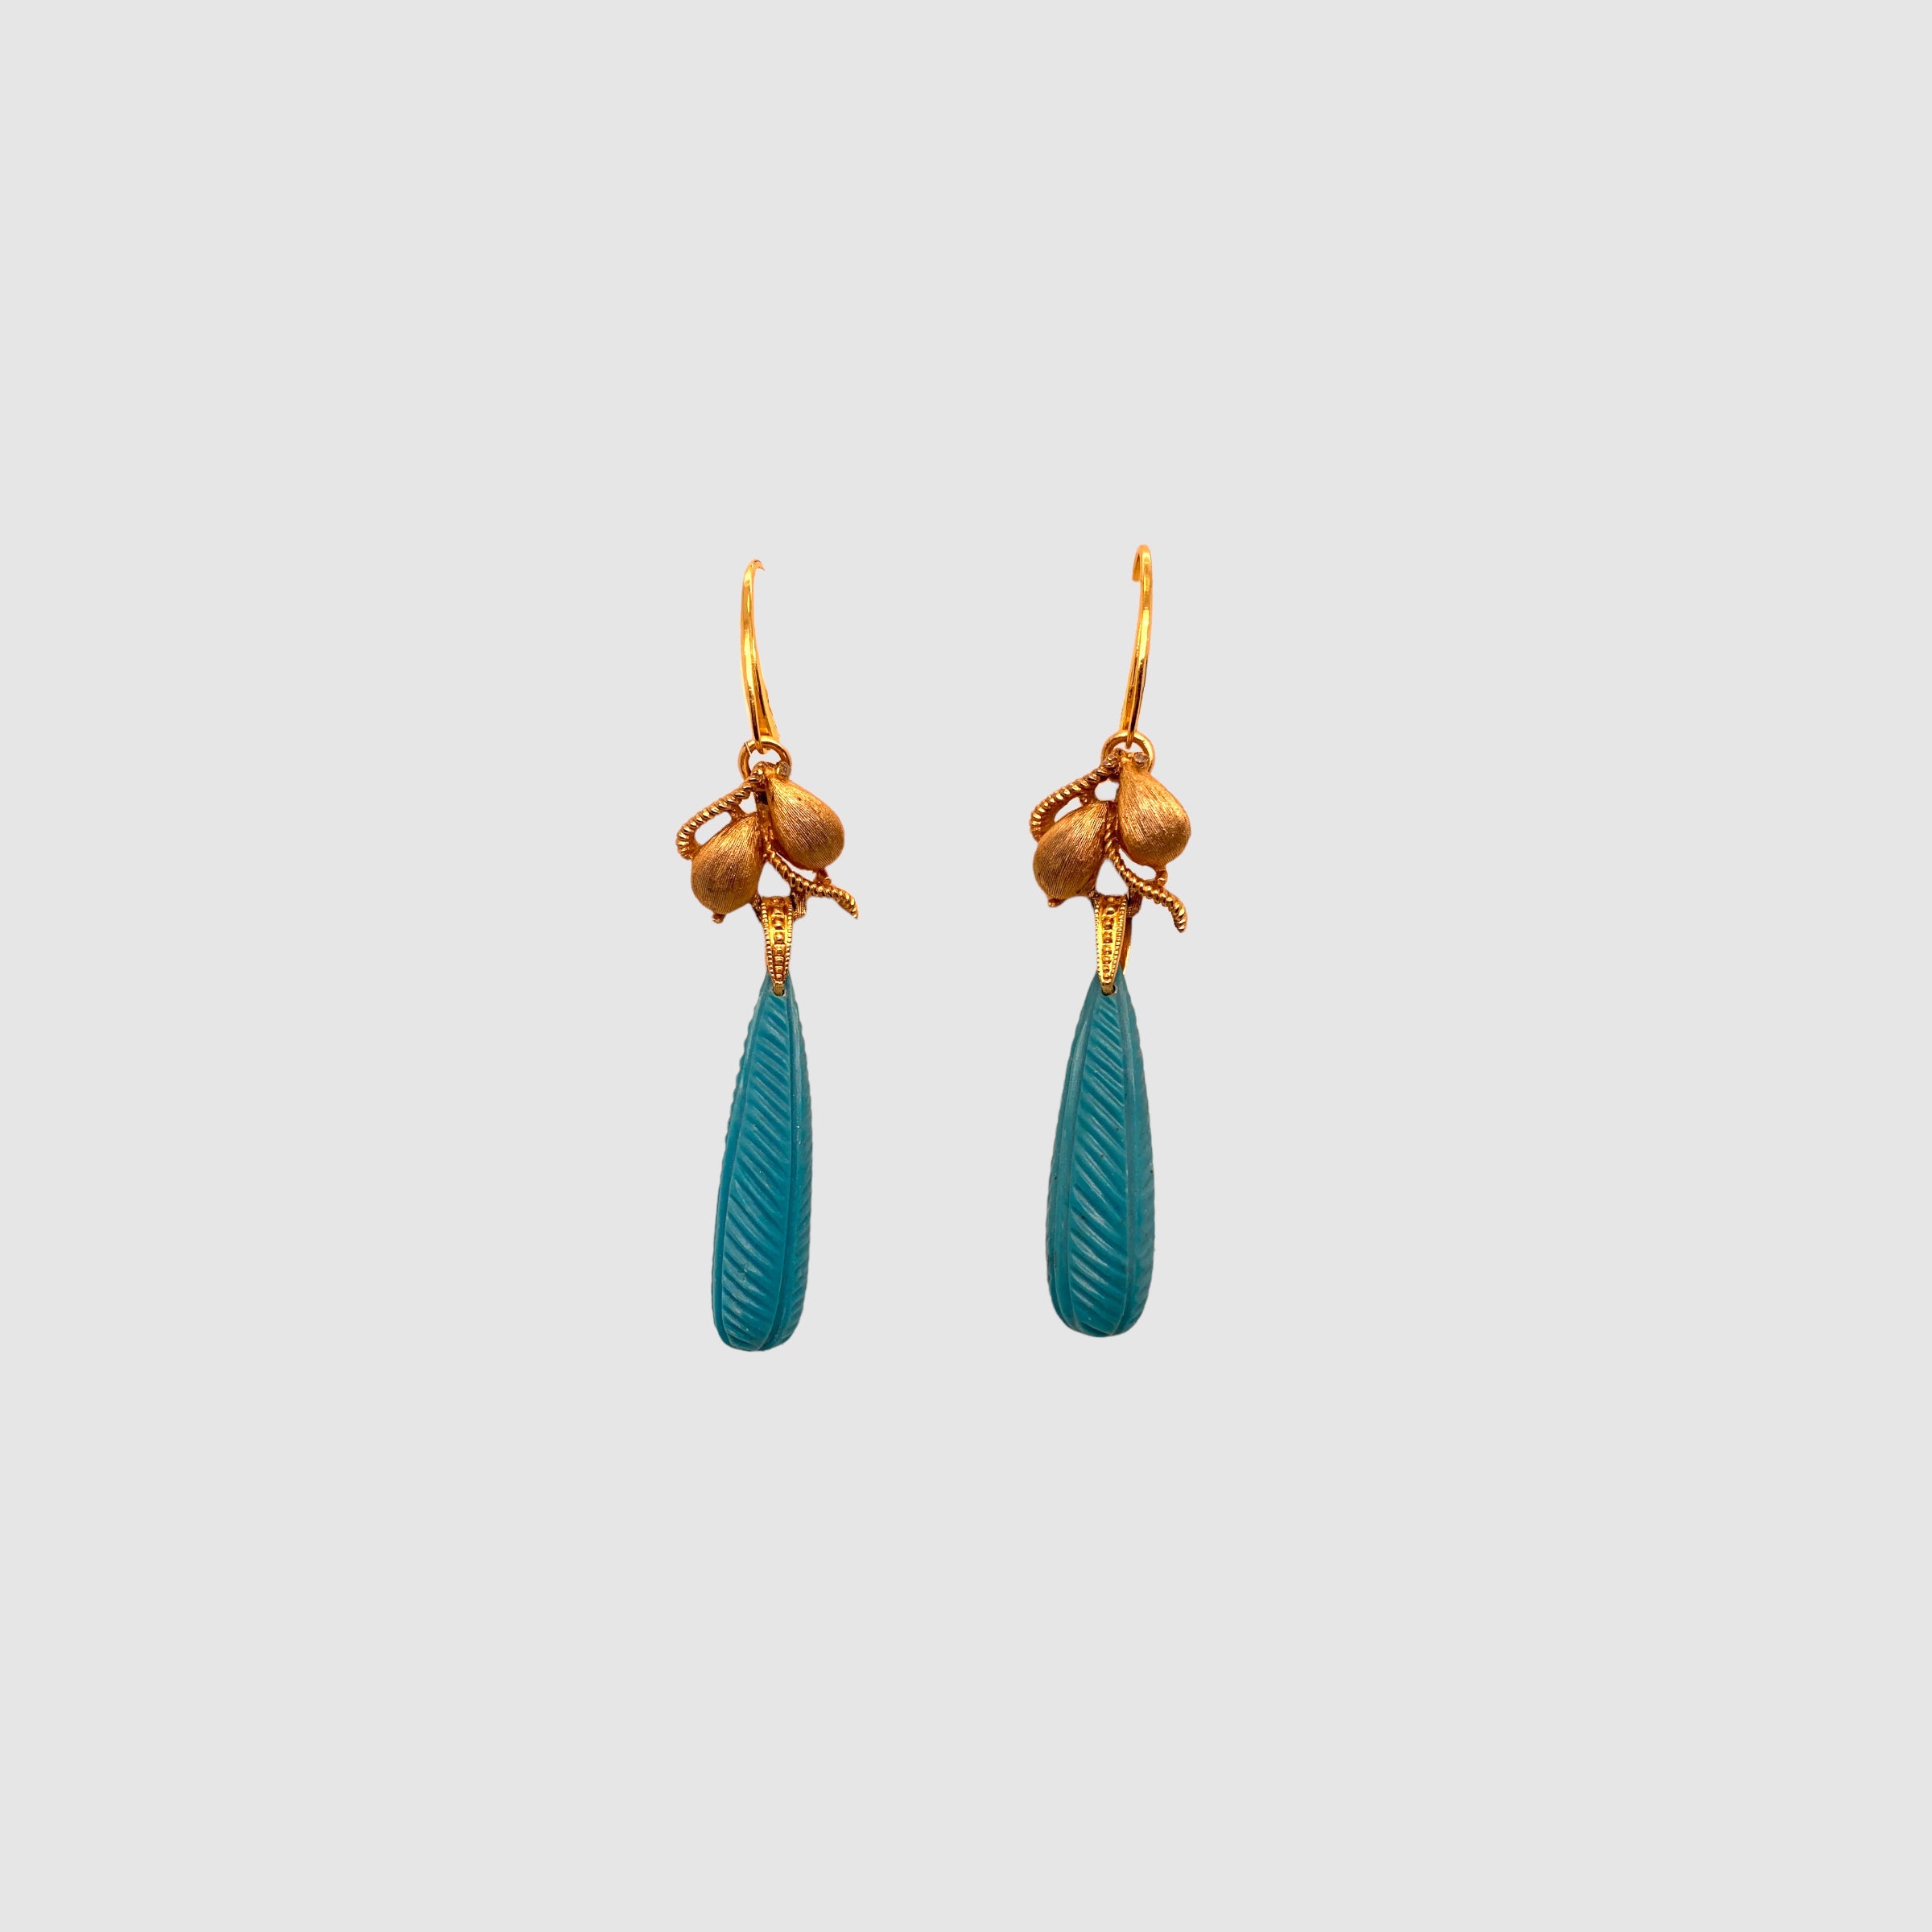 DECO EARRINGS // GOLD AND HAND CARVED HOWLITE